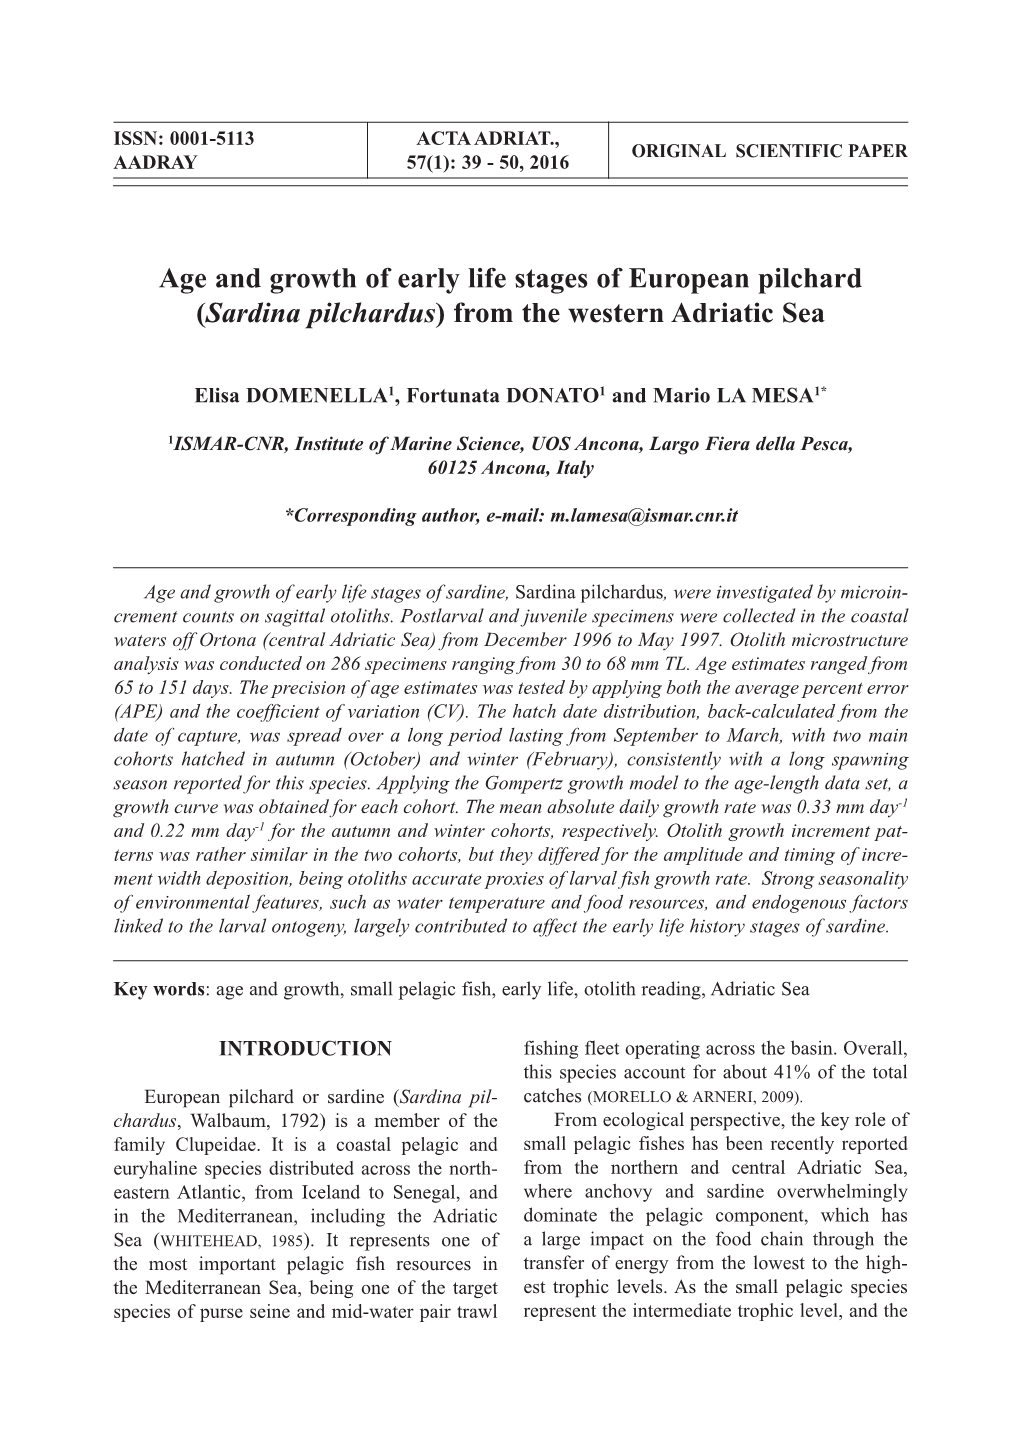 Age and Growth of Early Life Stages of European Pilchard (Sardina Pilchardus) from the Western Adriatic Sea